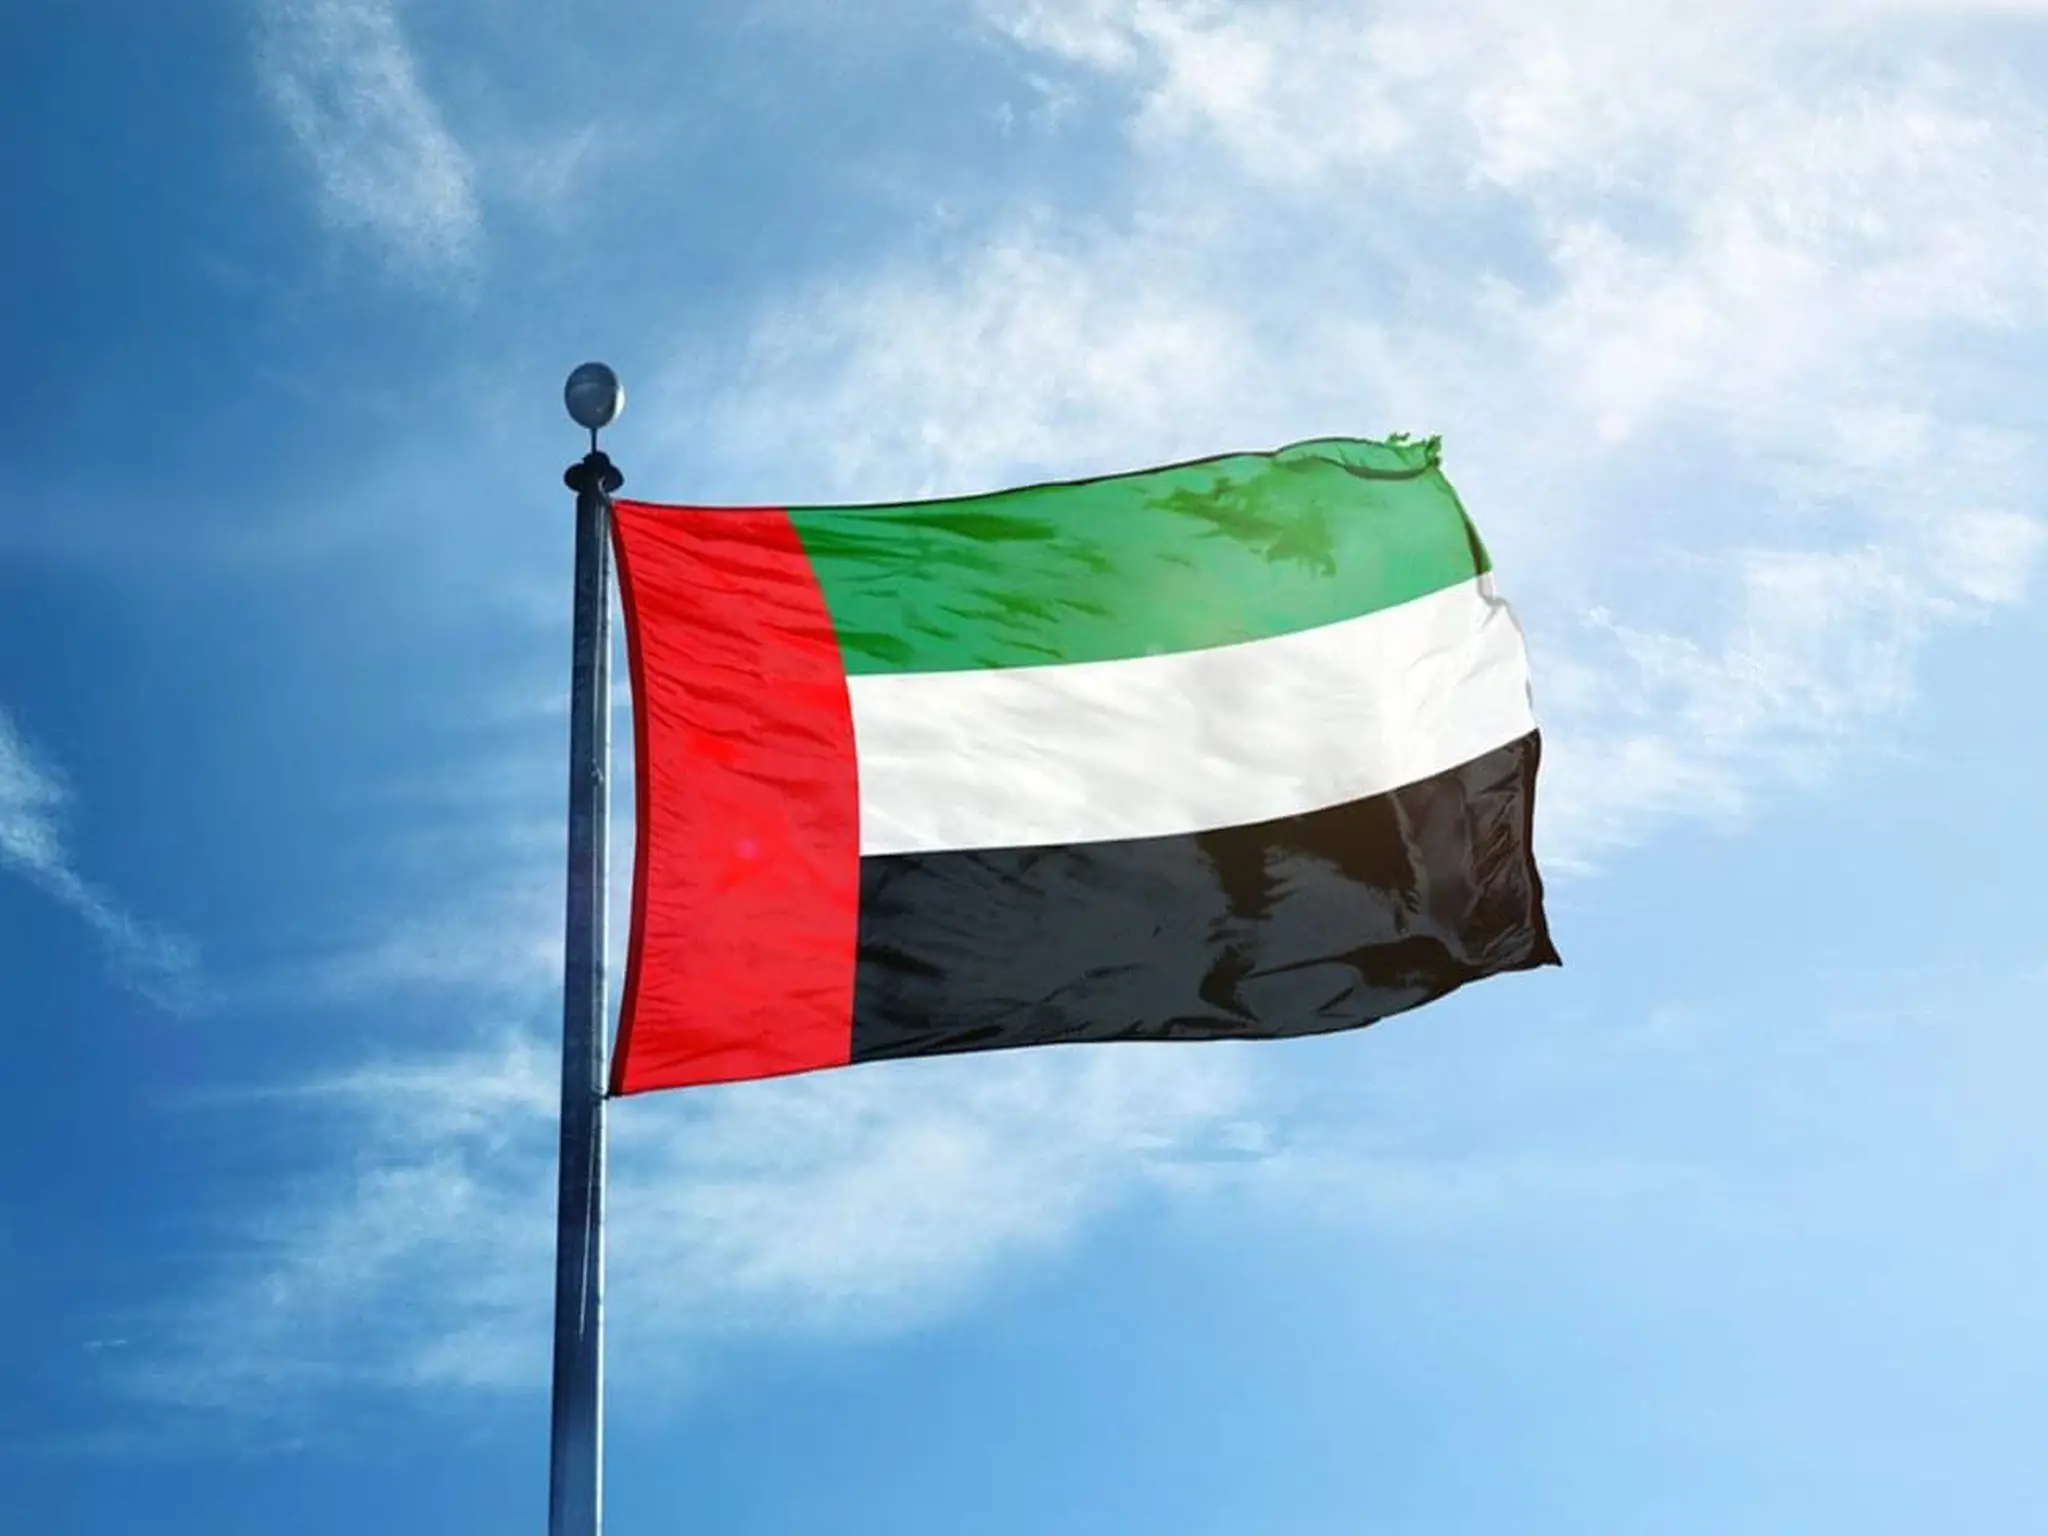 UAE: Announcing job opportunities with salaries from 5,000 to 20,000 dirhams